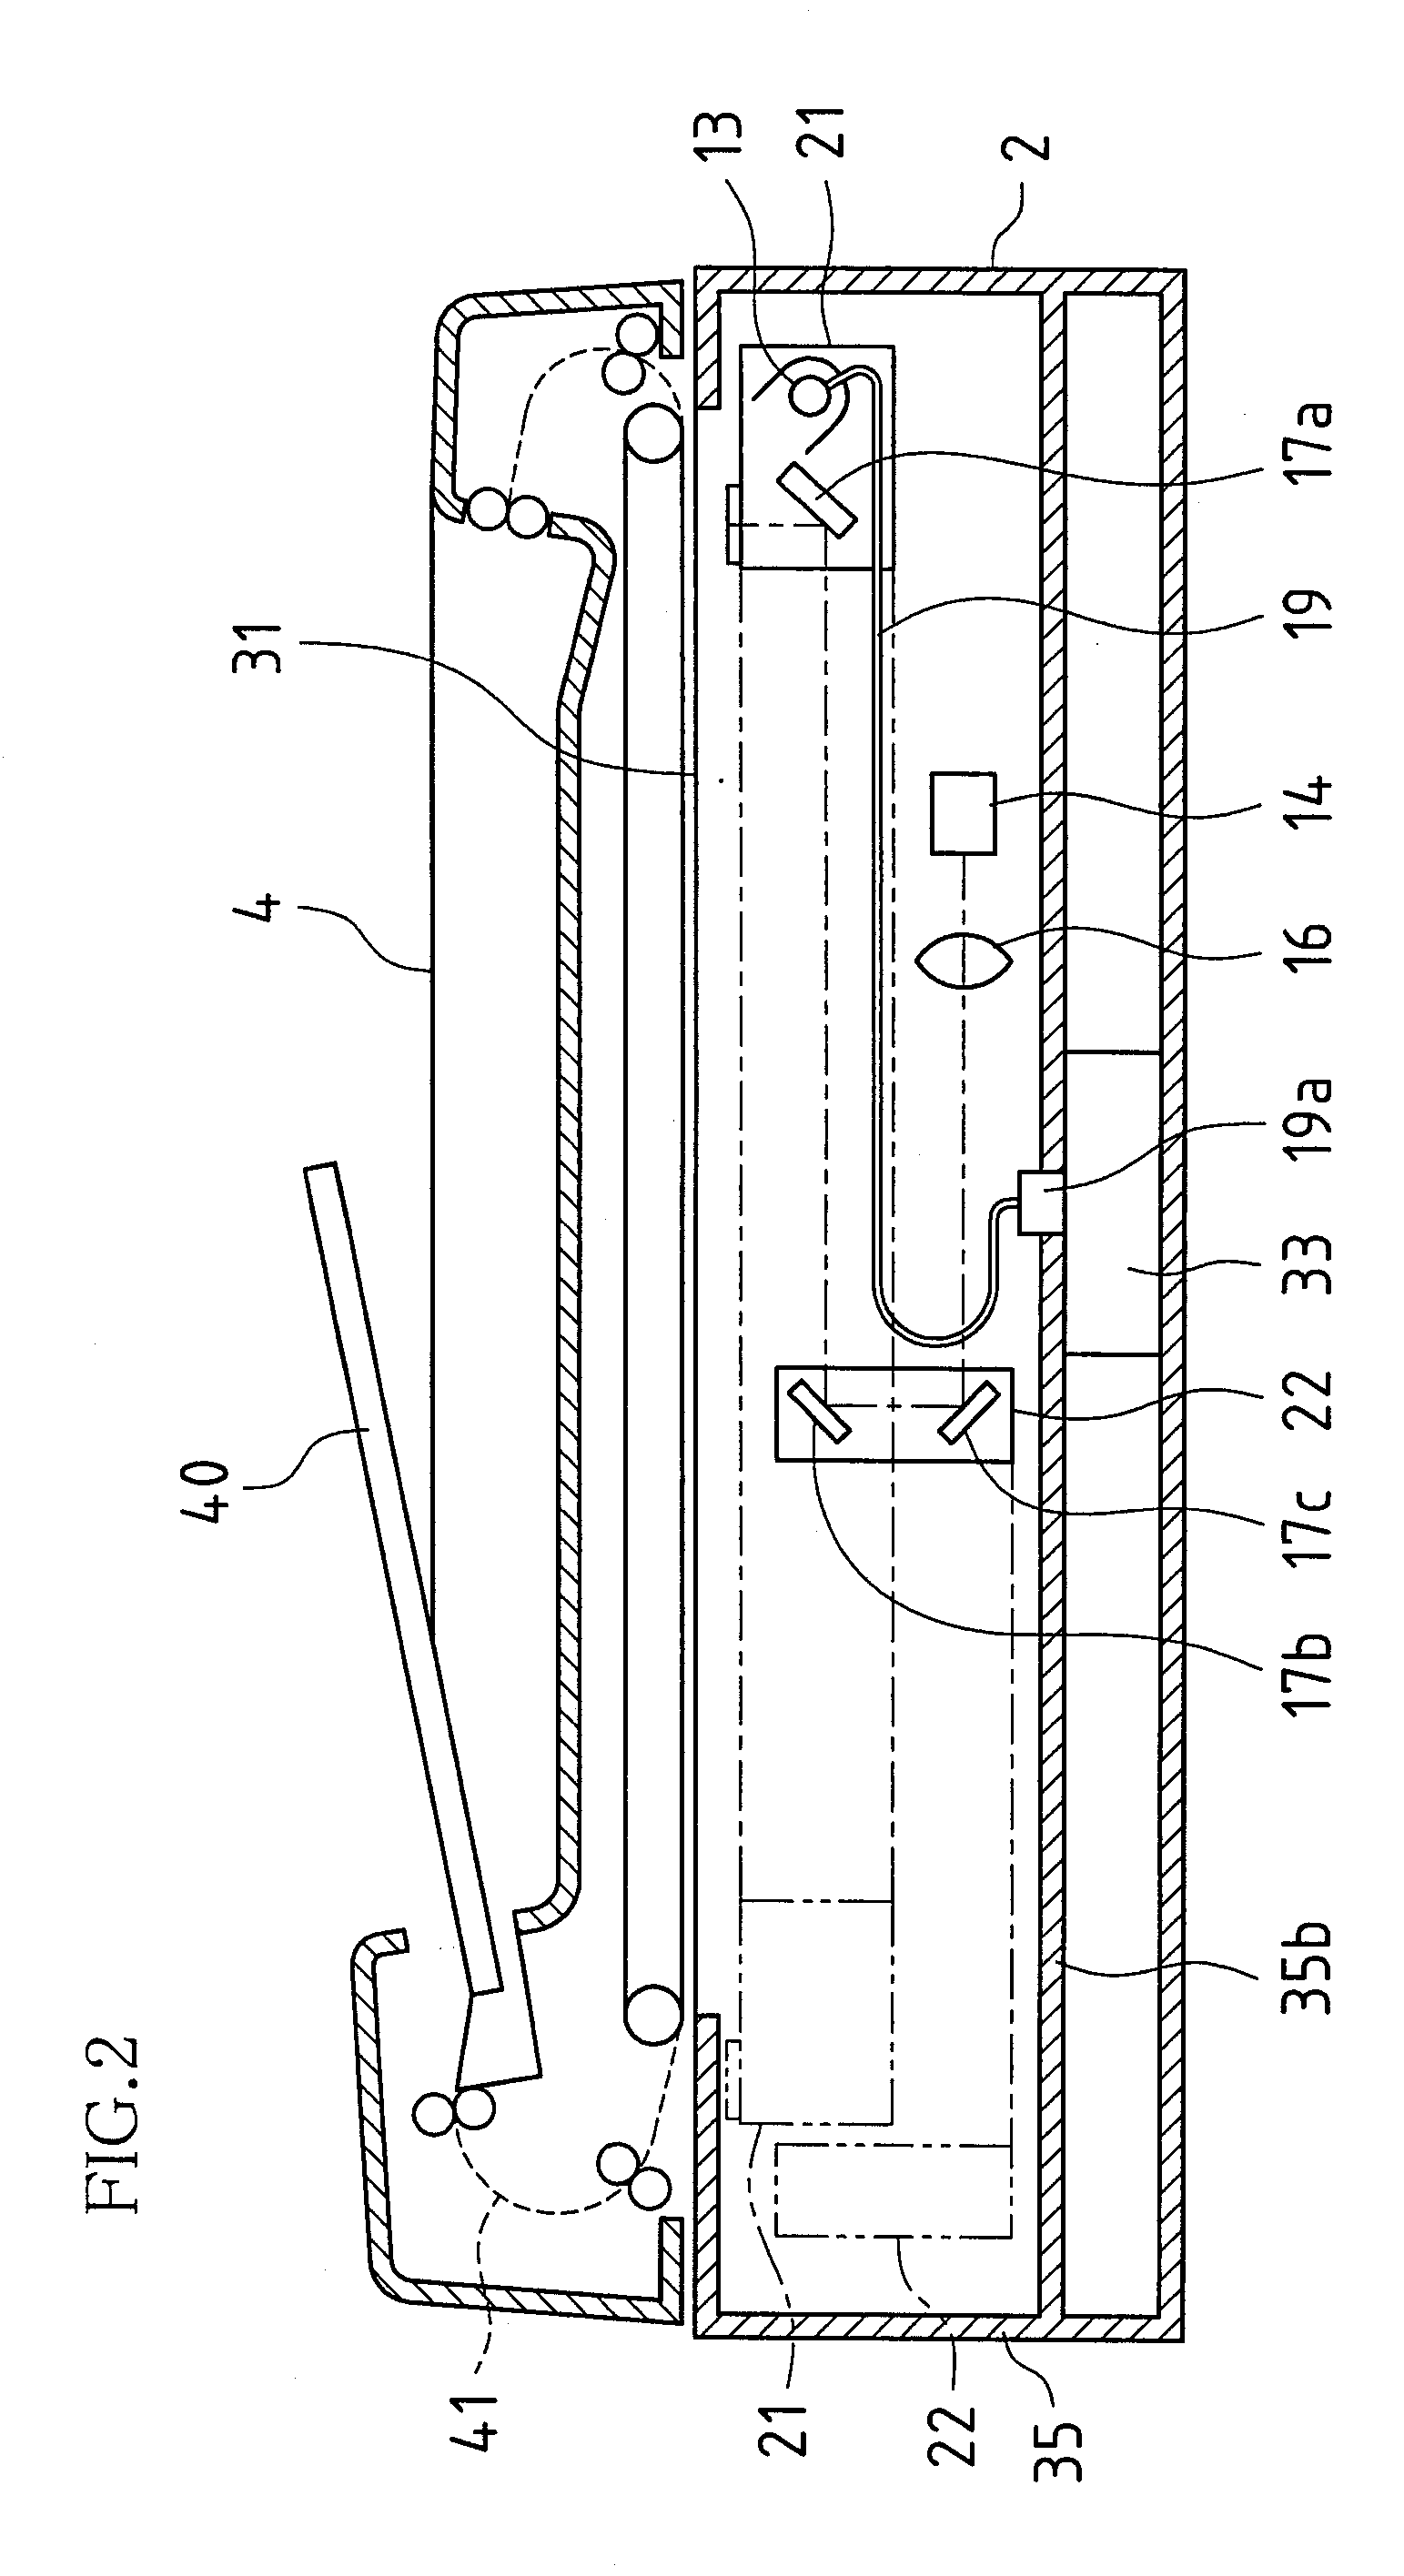 Structure supporting distribution cable of document reading apparatus